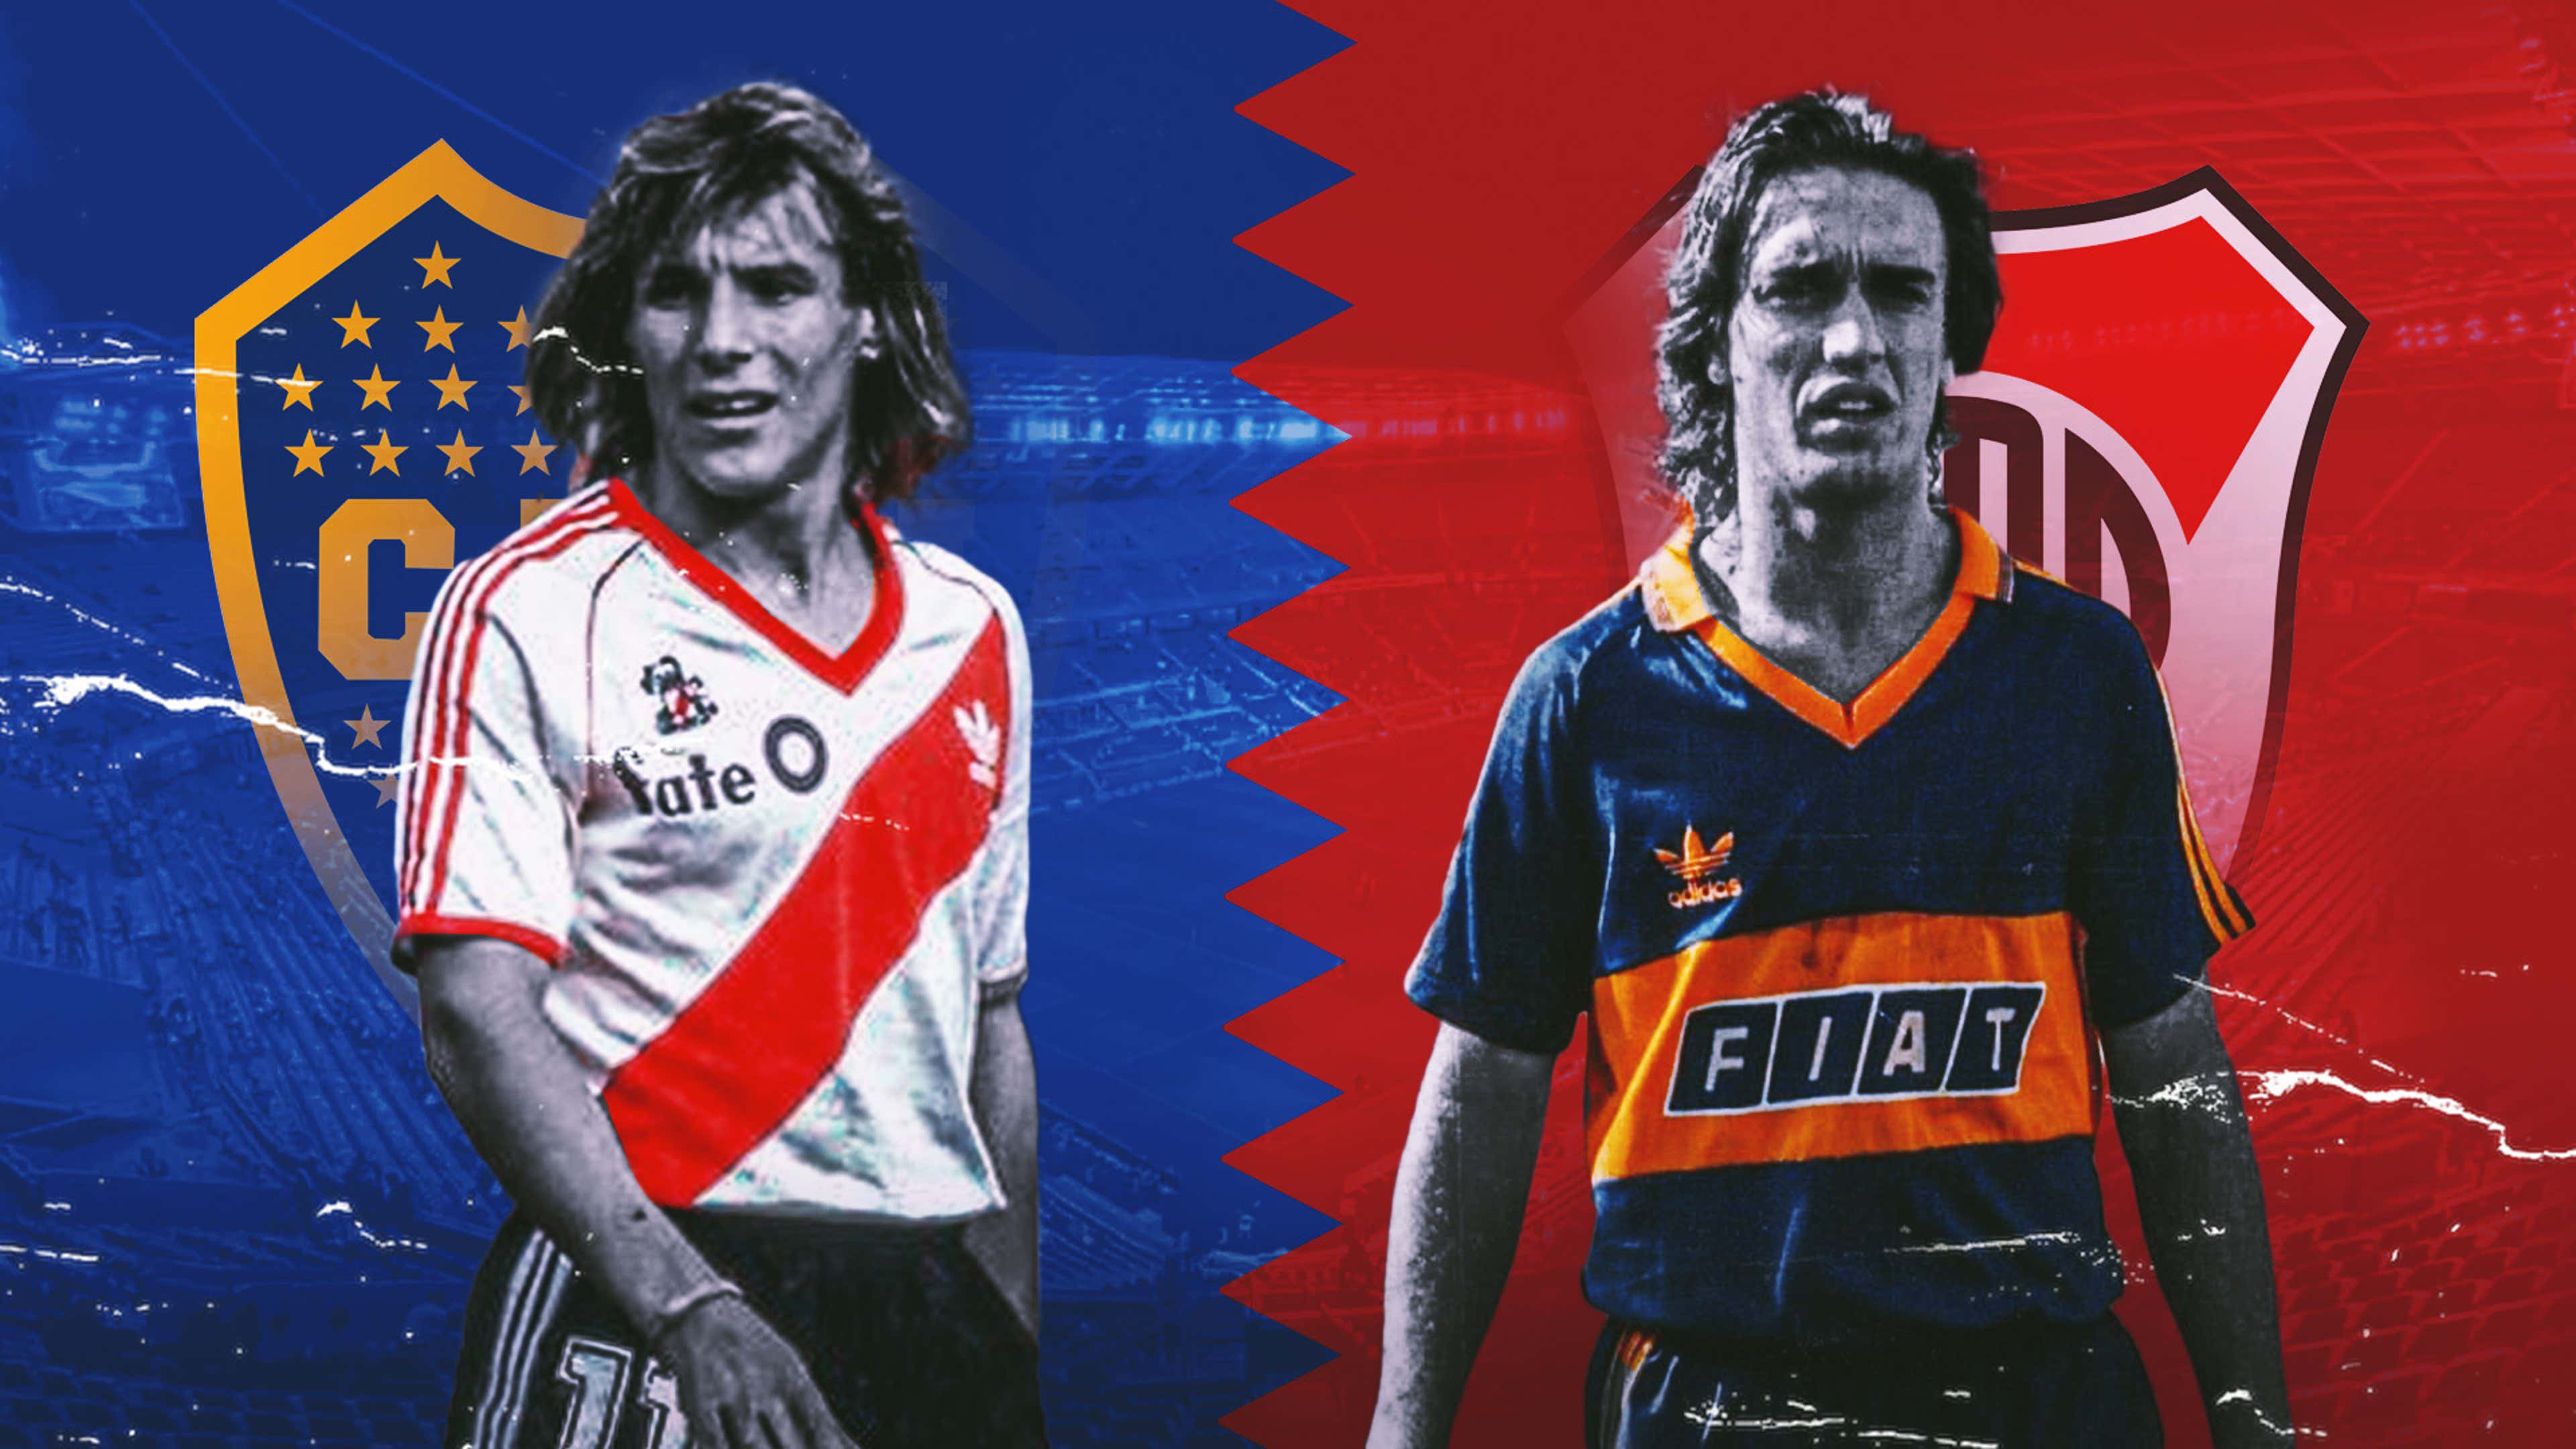 From Gabriel Batistuta to Claudio Caniggia - Meet the players who crossed  the Superclasico divide and played for both Boca Juniors and River Plate